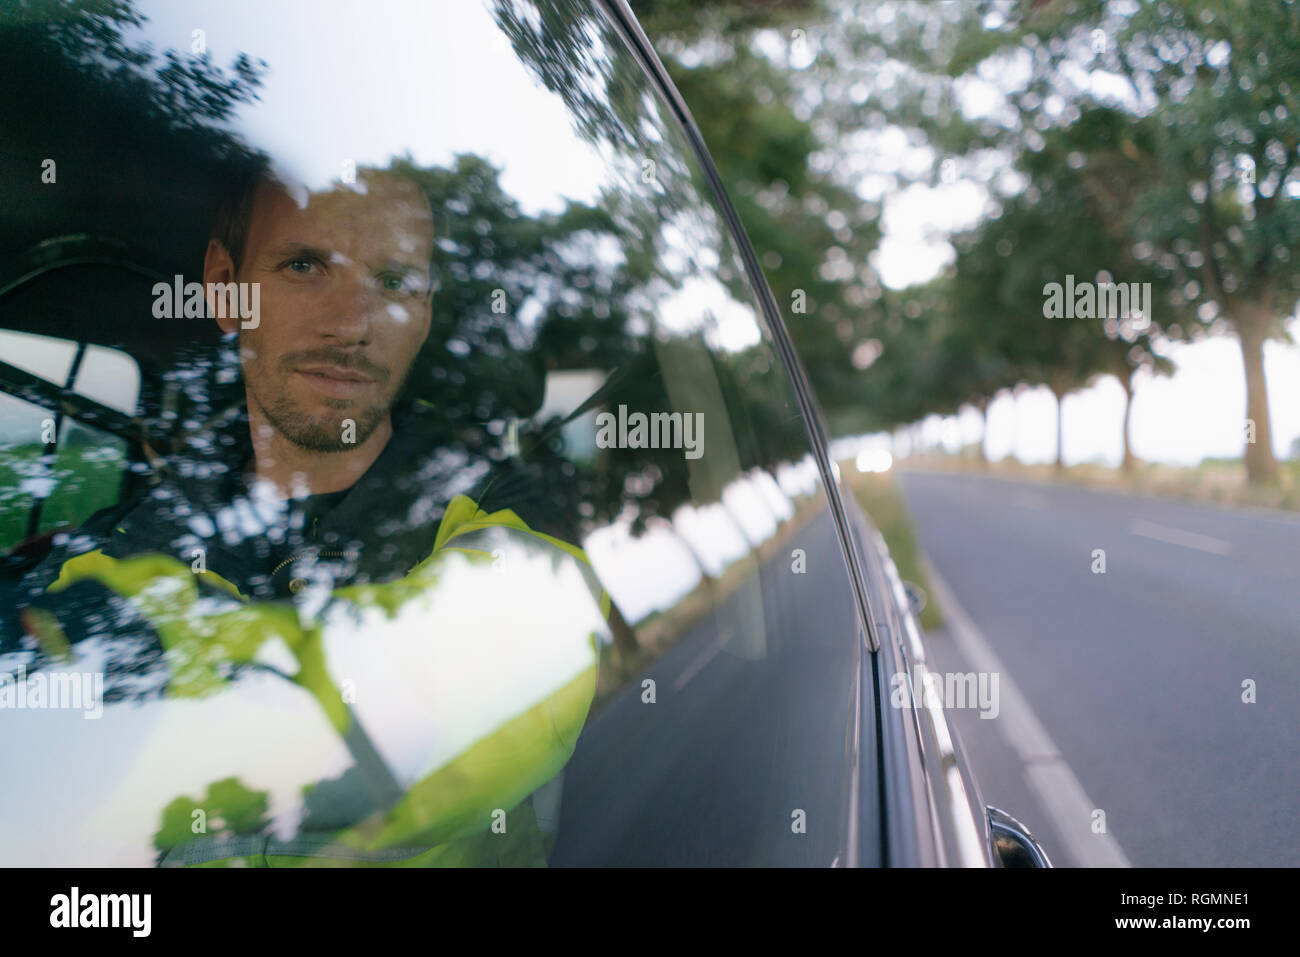 Portrait of man in protective workwear in a car at country road Stock Photo